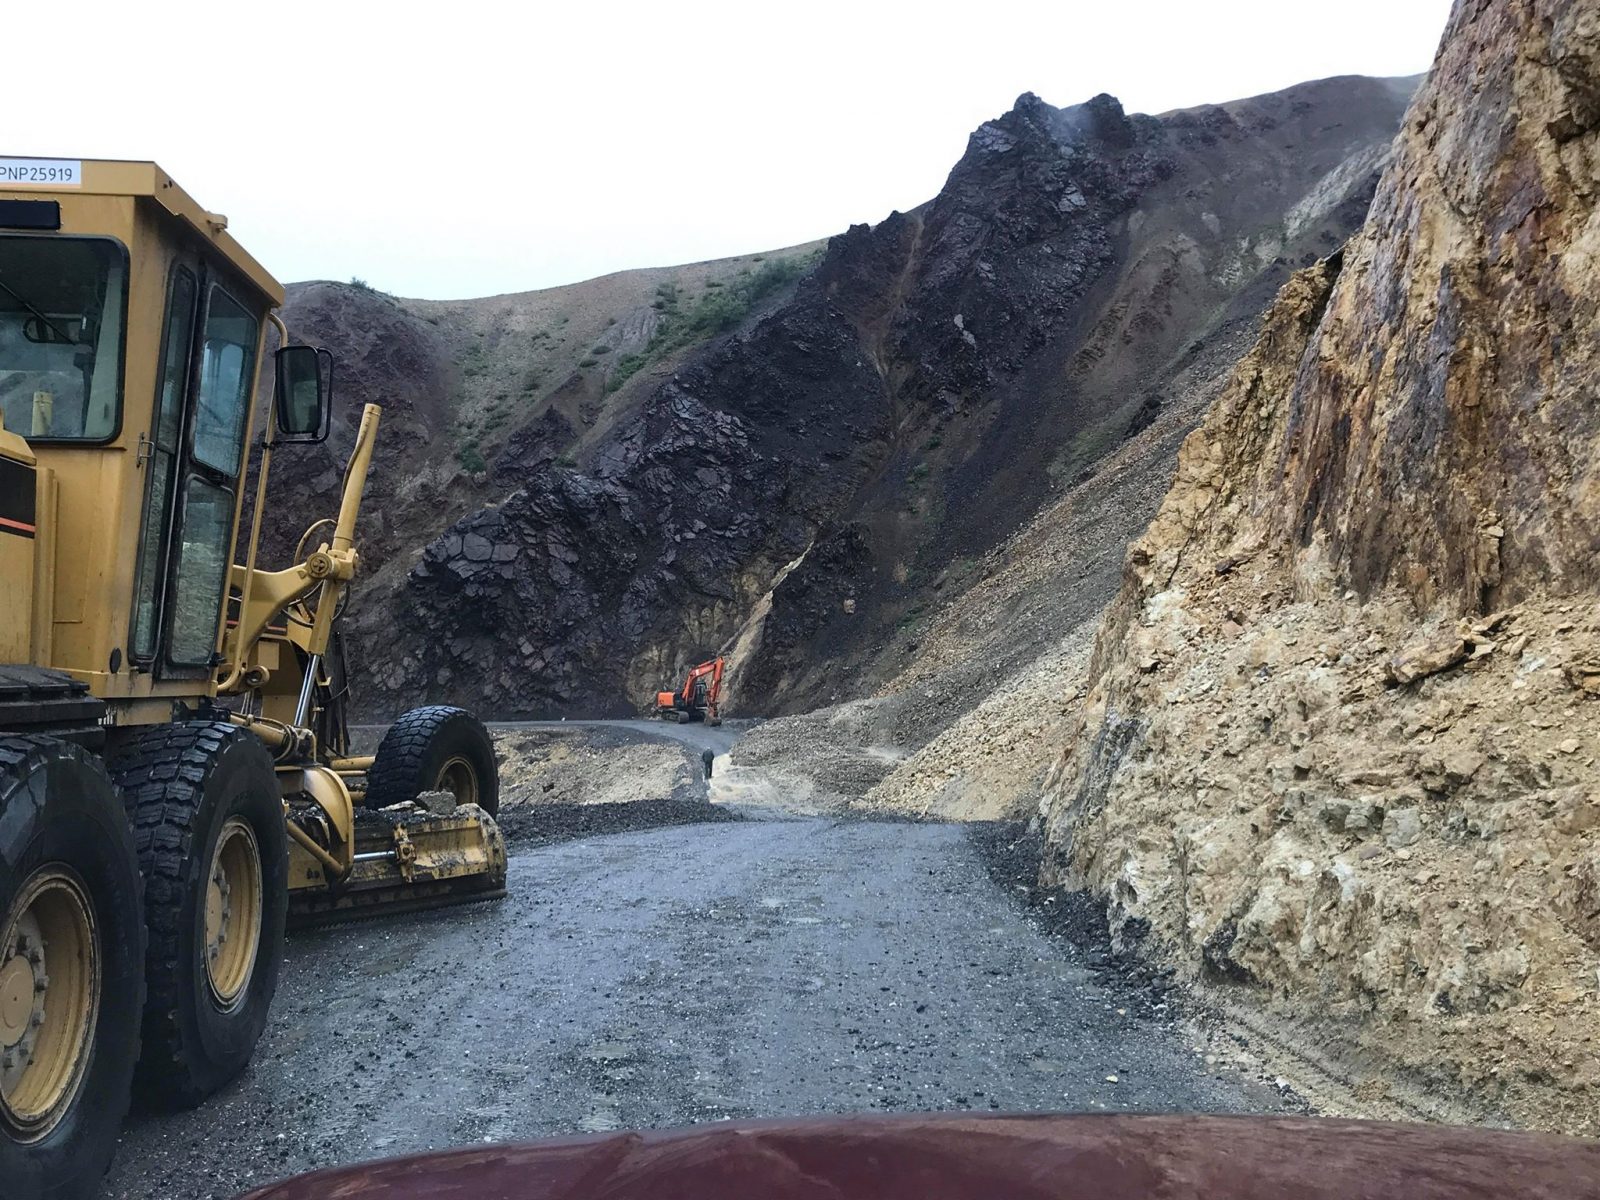 Repairing the one road through Denali National Park after a rock slide in 2019. (NPS Photo/WeeBee Aschenbrenner)